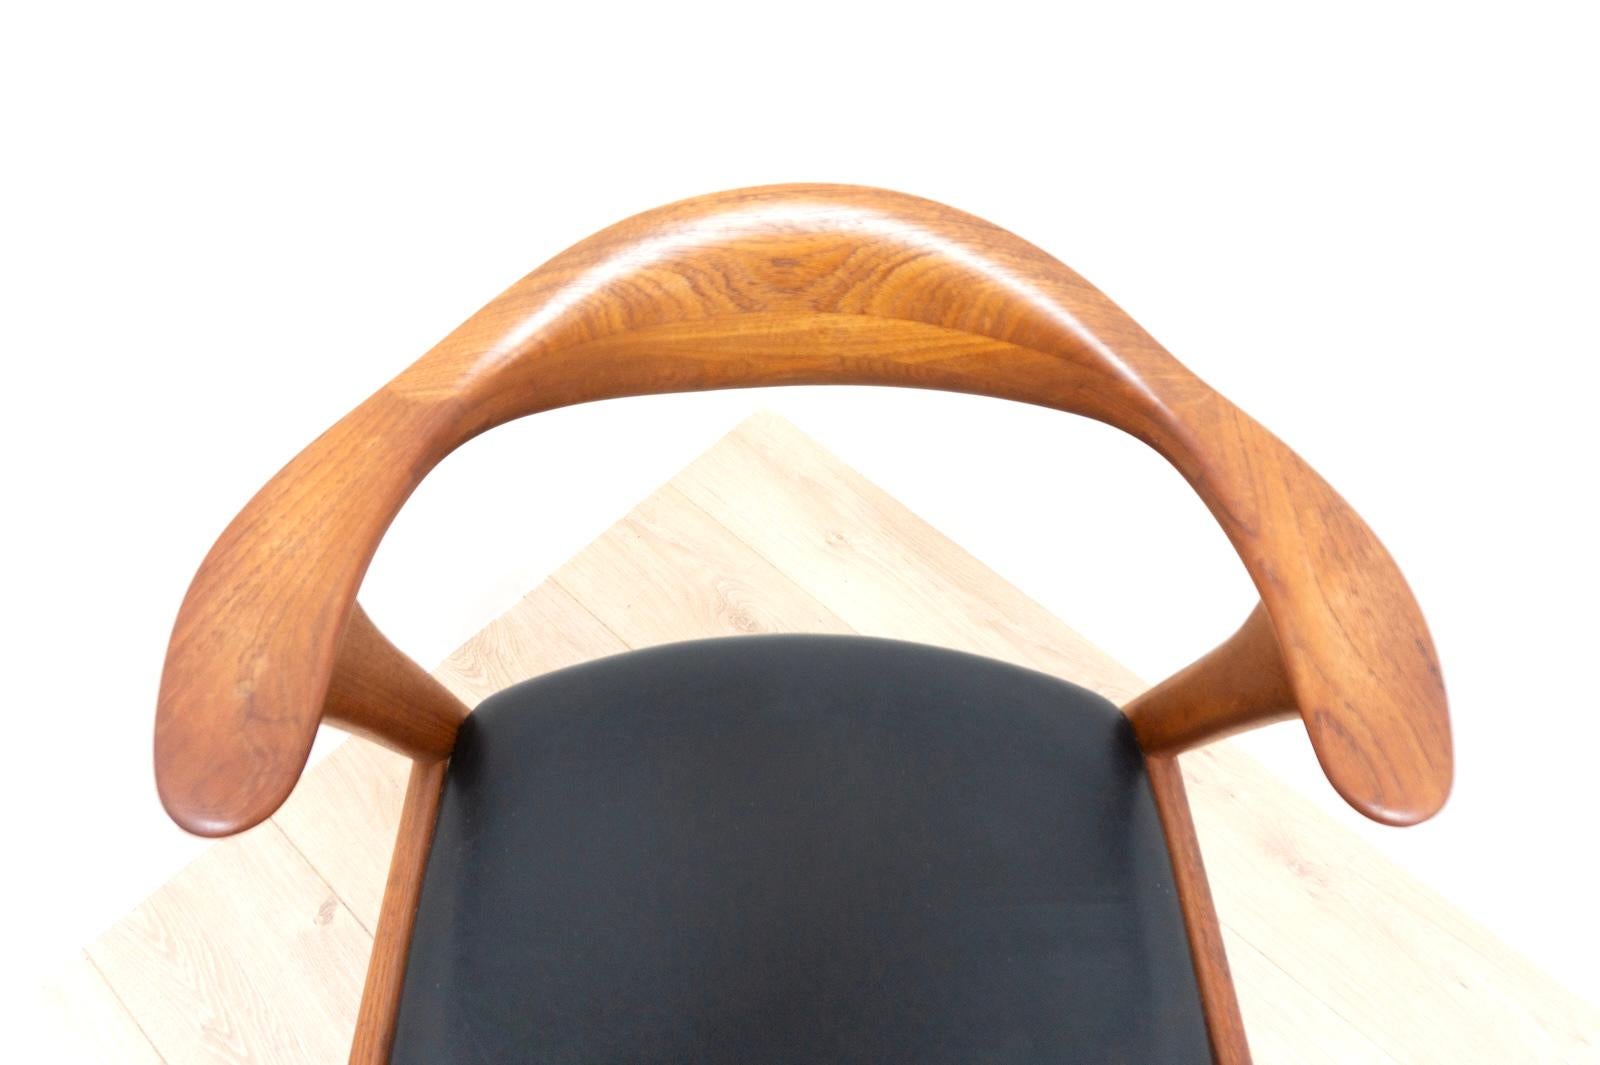 Stylish midcentury Danish Vintage Teak Desk Chair Model 49 by Danish Designer Erik Kirksgaard circa 1959. The cabinetry skill throughout is exceptional as one would expect with a solid teak frame with exceptional grain.

The seat is upholstered in